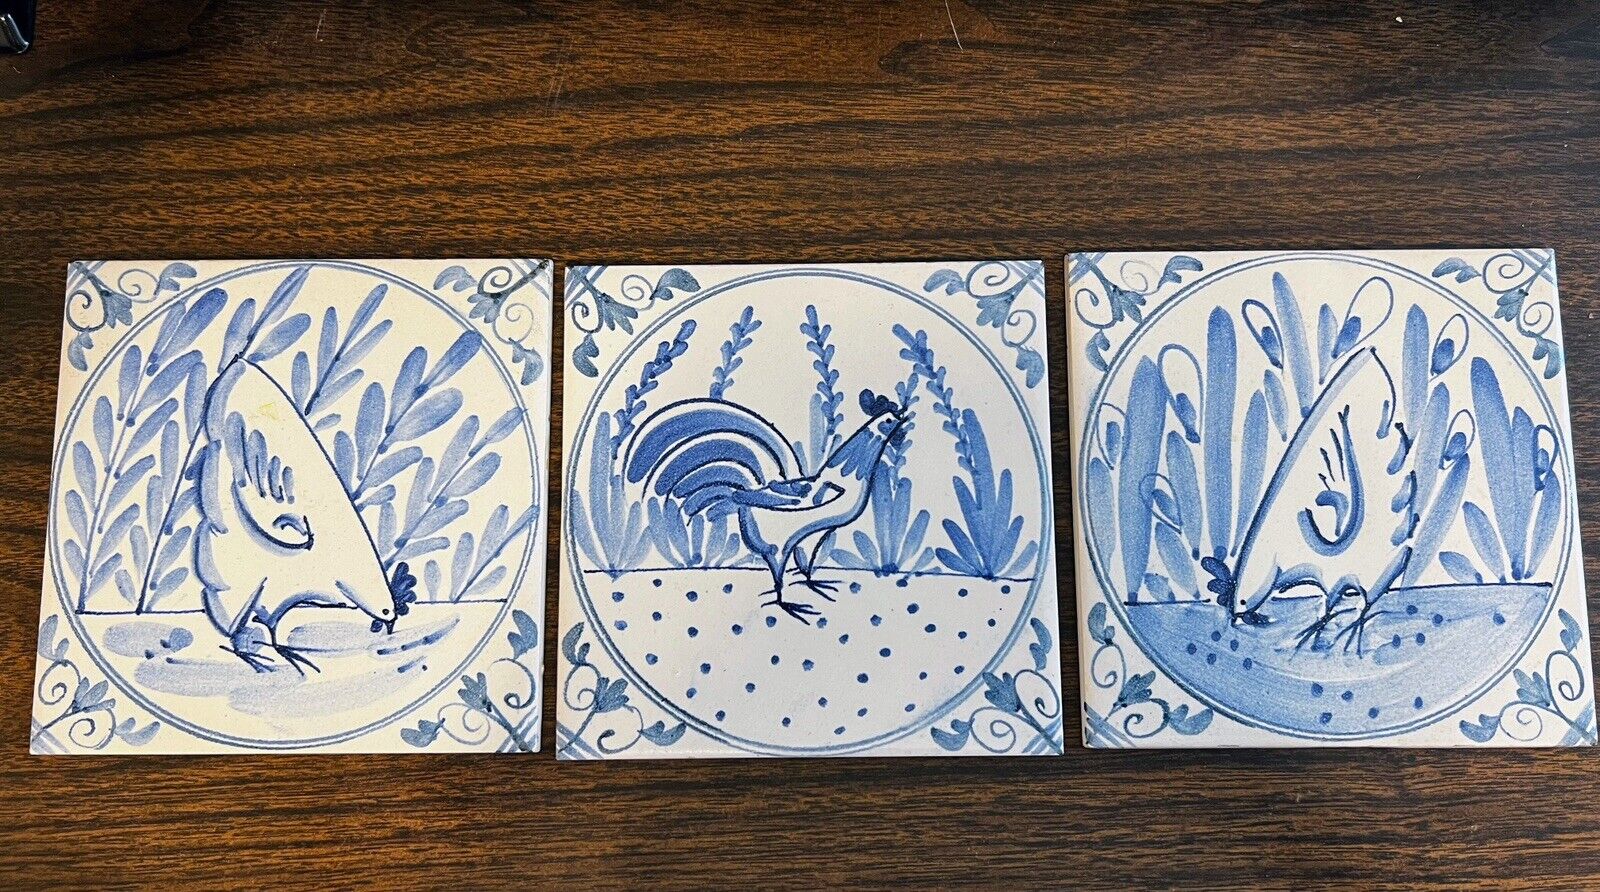 Folk Art Chicken Tiles 6 x 6 Ceramic Blue and White 3 Pieces VG Condition